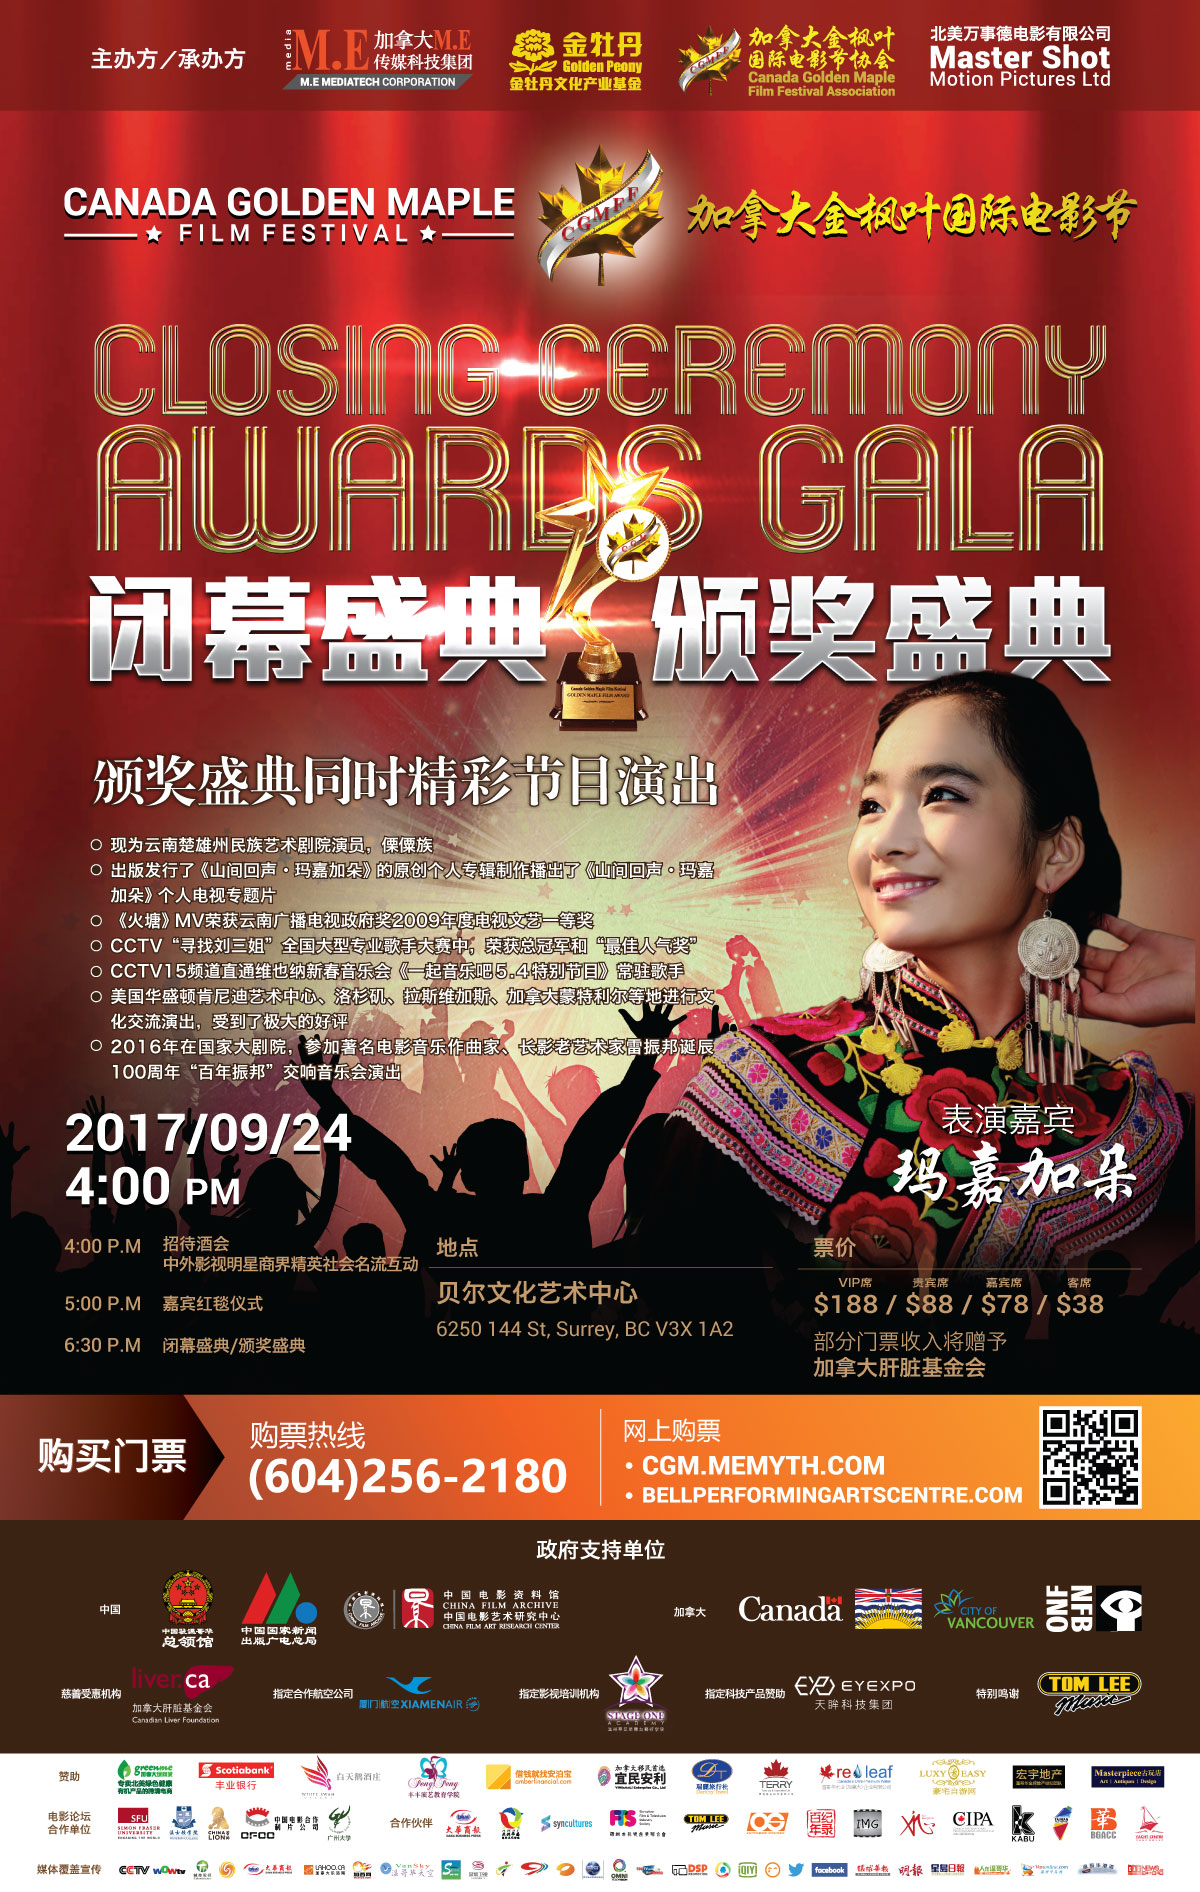 2017 Canada Golden Maple Film Festival Poster Majiajiaduo in Chinese